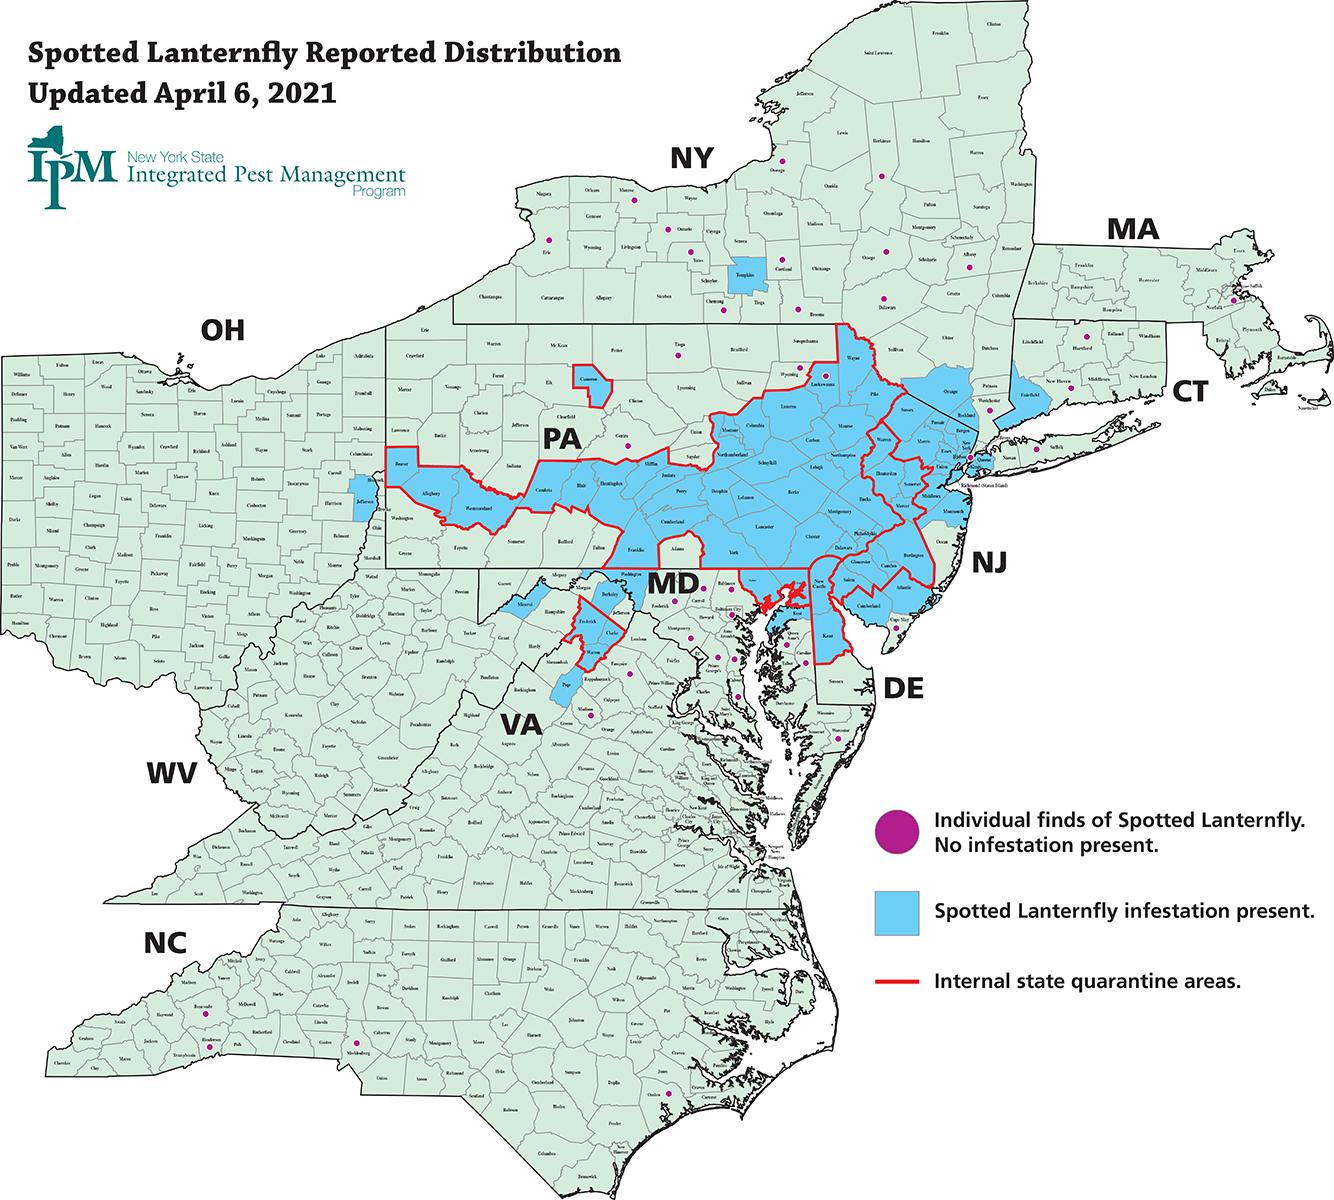 Spotted lanternfly reported distribution map, April 2021